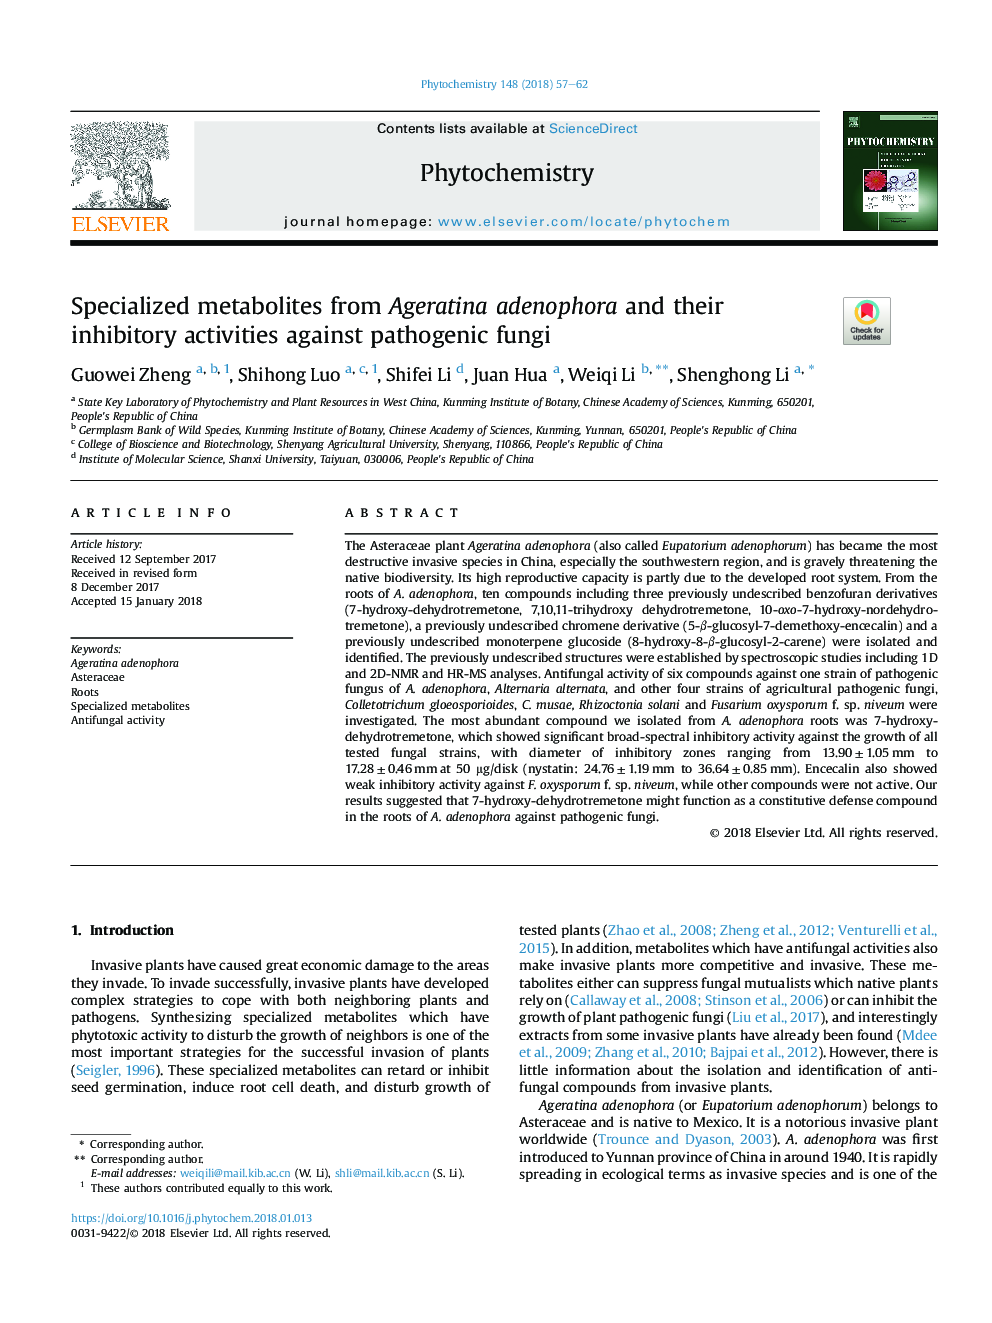 Specialized metabolites from Ageratina adenophora and their inhibitory activities against pathogenic fungi